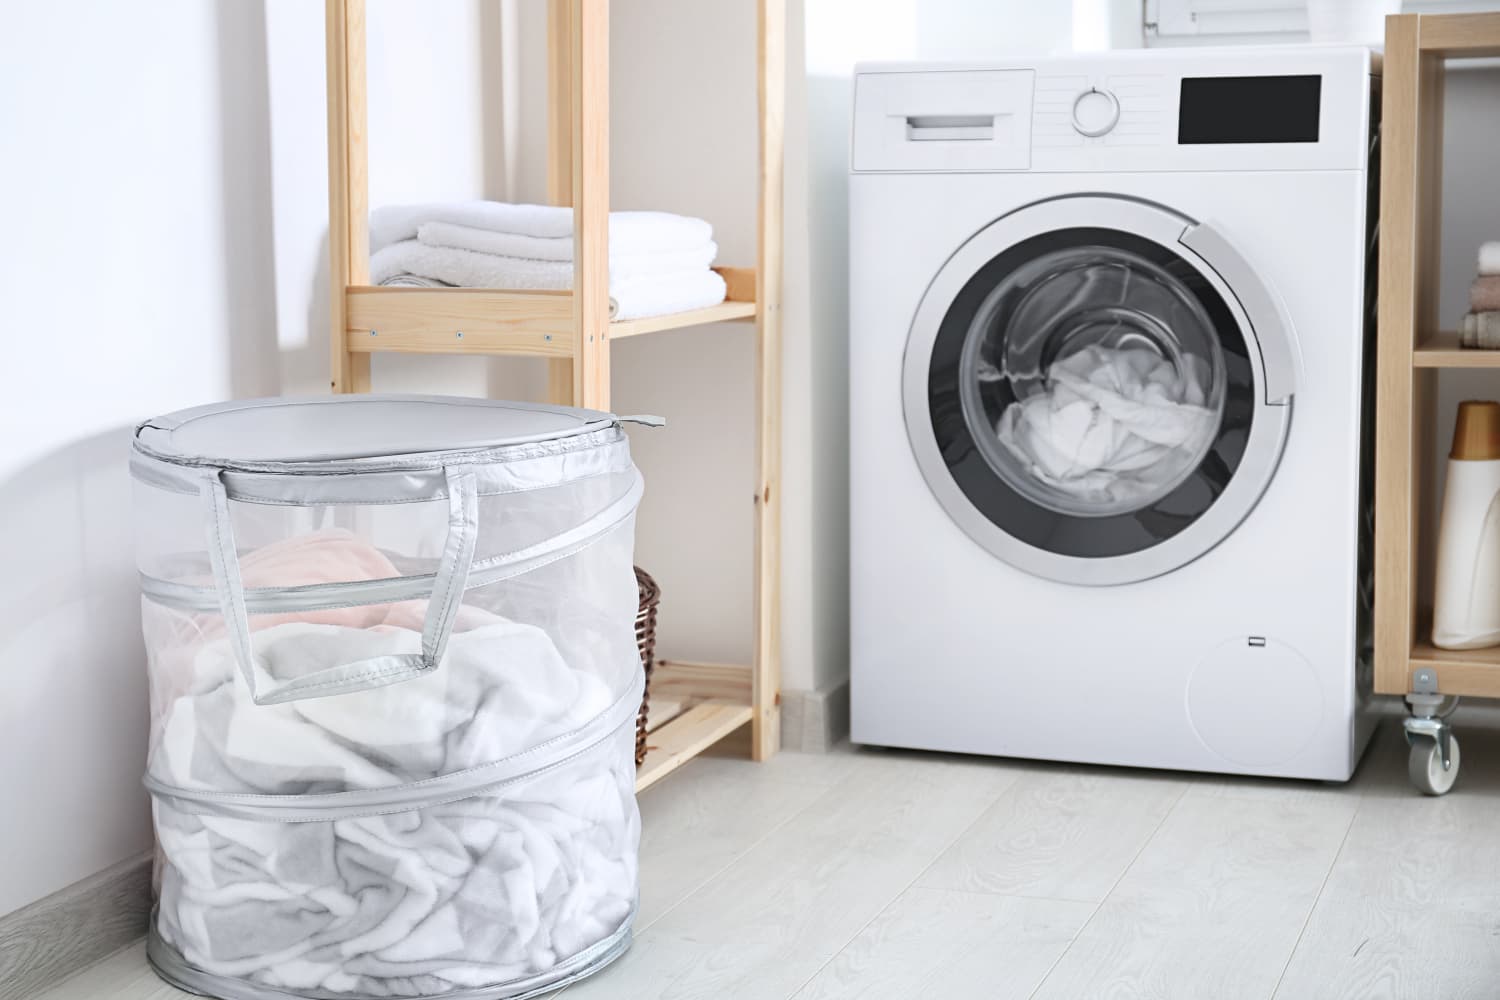 Washing Machine Cover Options To Keep Your Machine Safe - Times of